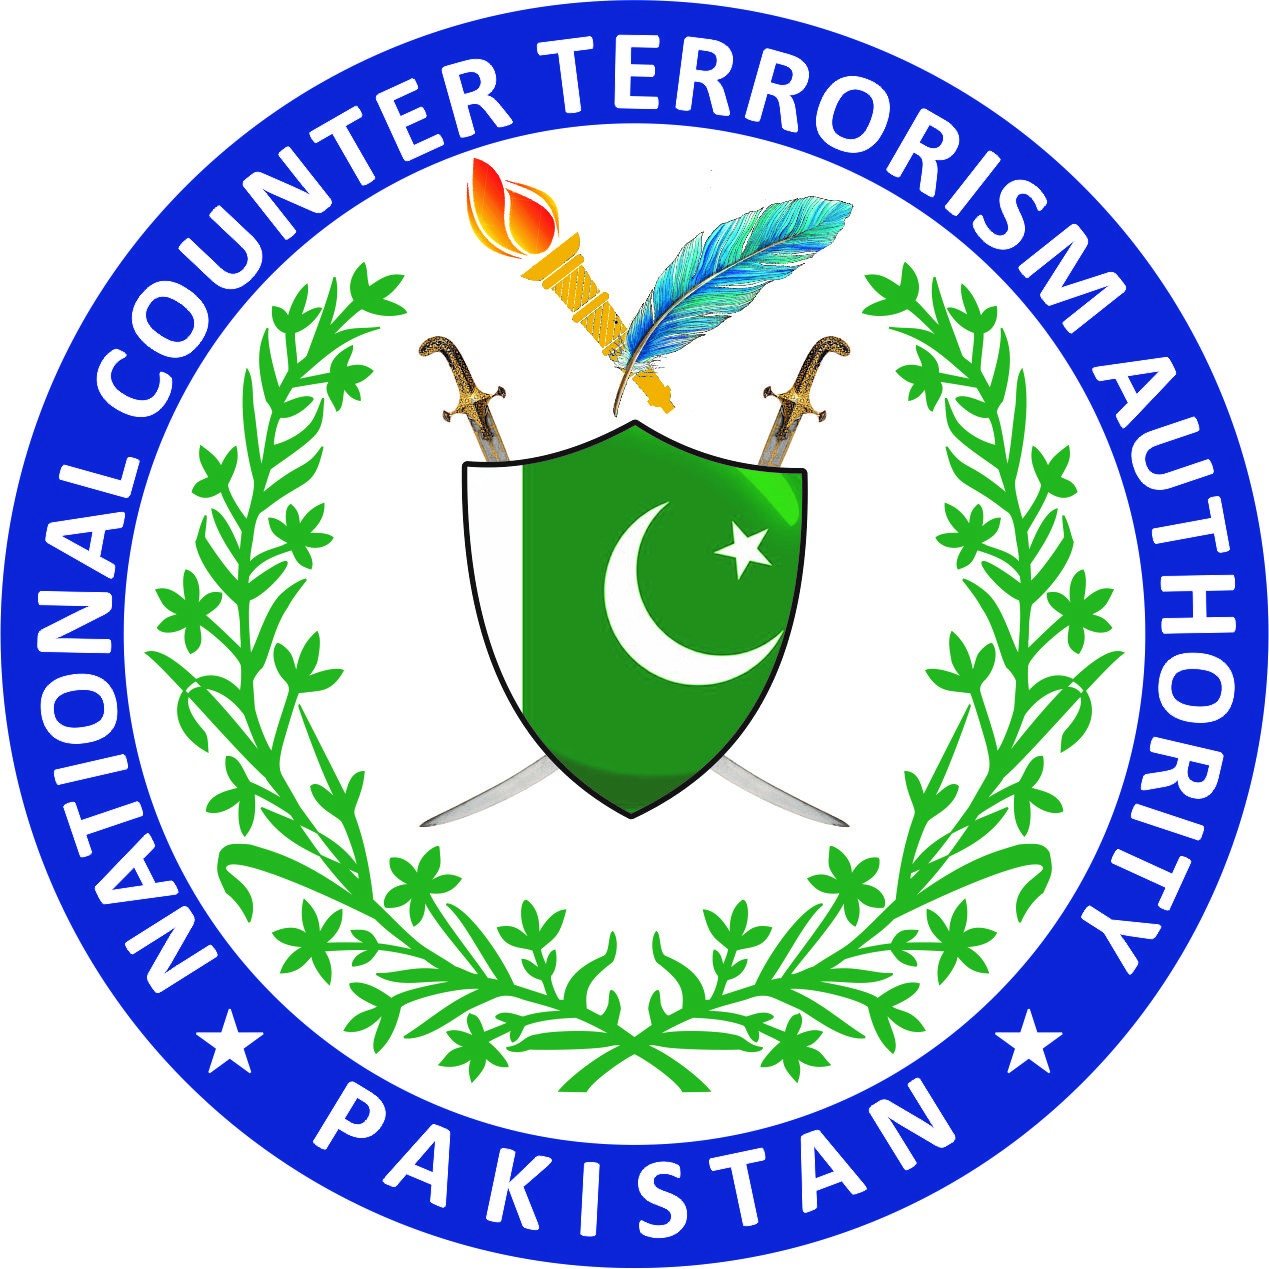 Official Account of National Counter Terrorism Authority (NACTA), Pakistan. Official Pages:                      
https://t.co/yoC876uwjW
https://t.co/OFQnZq3c8b